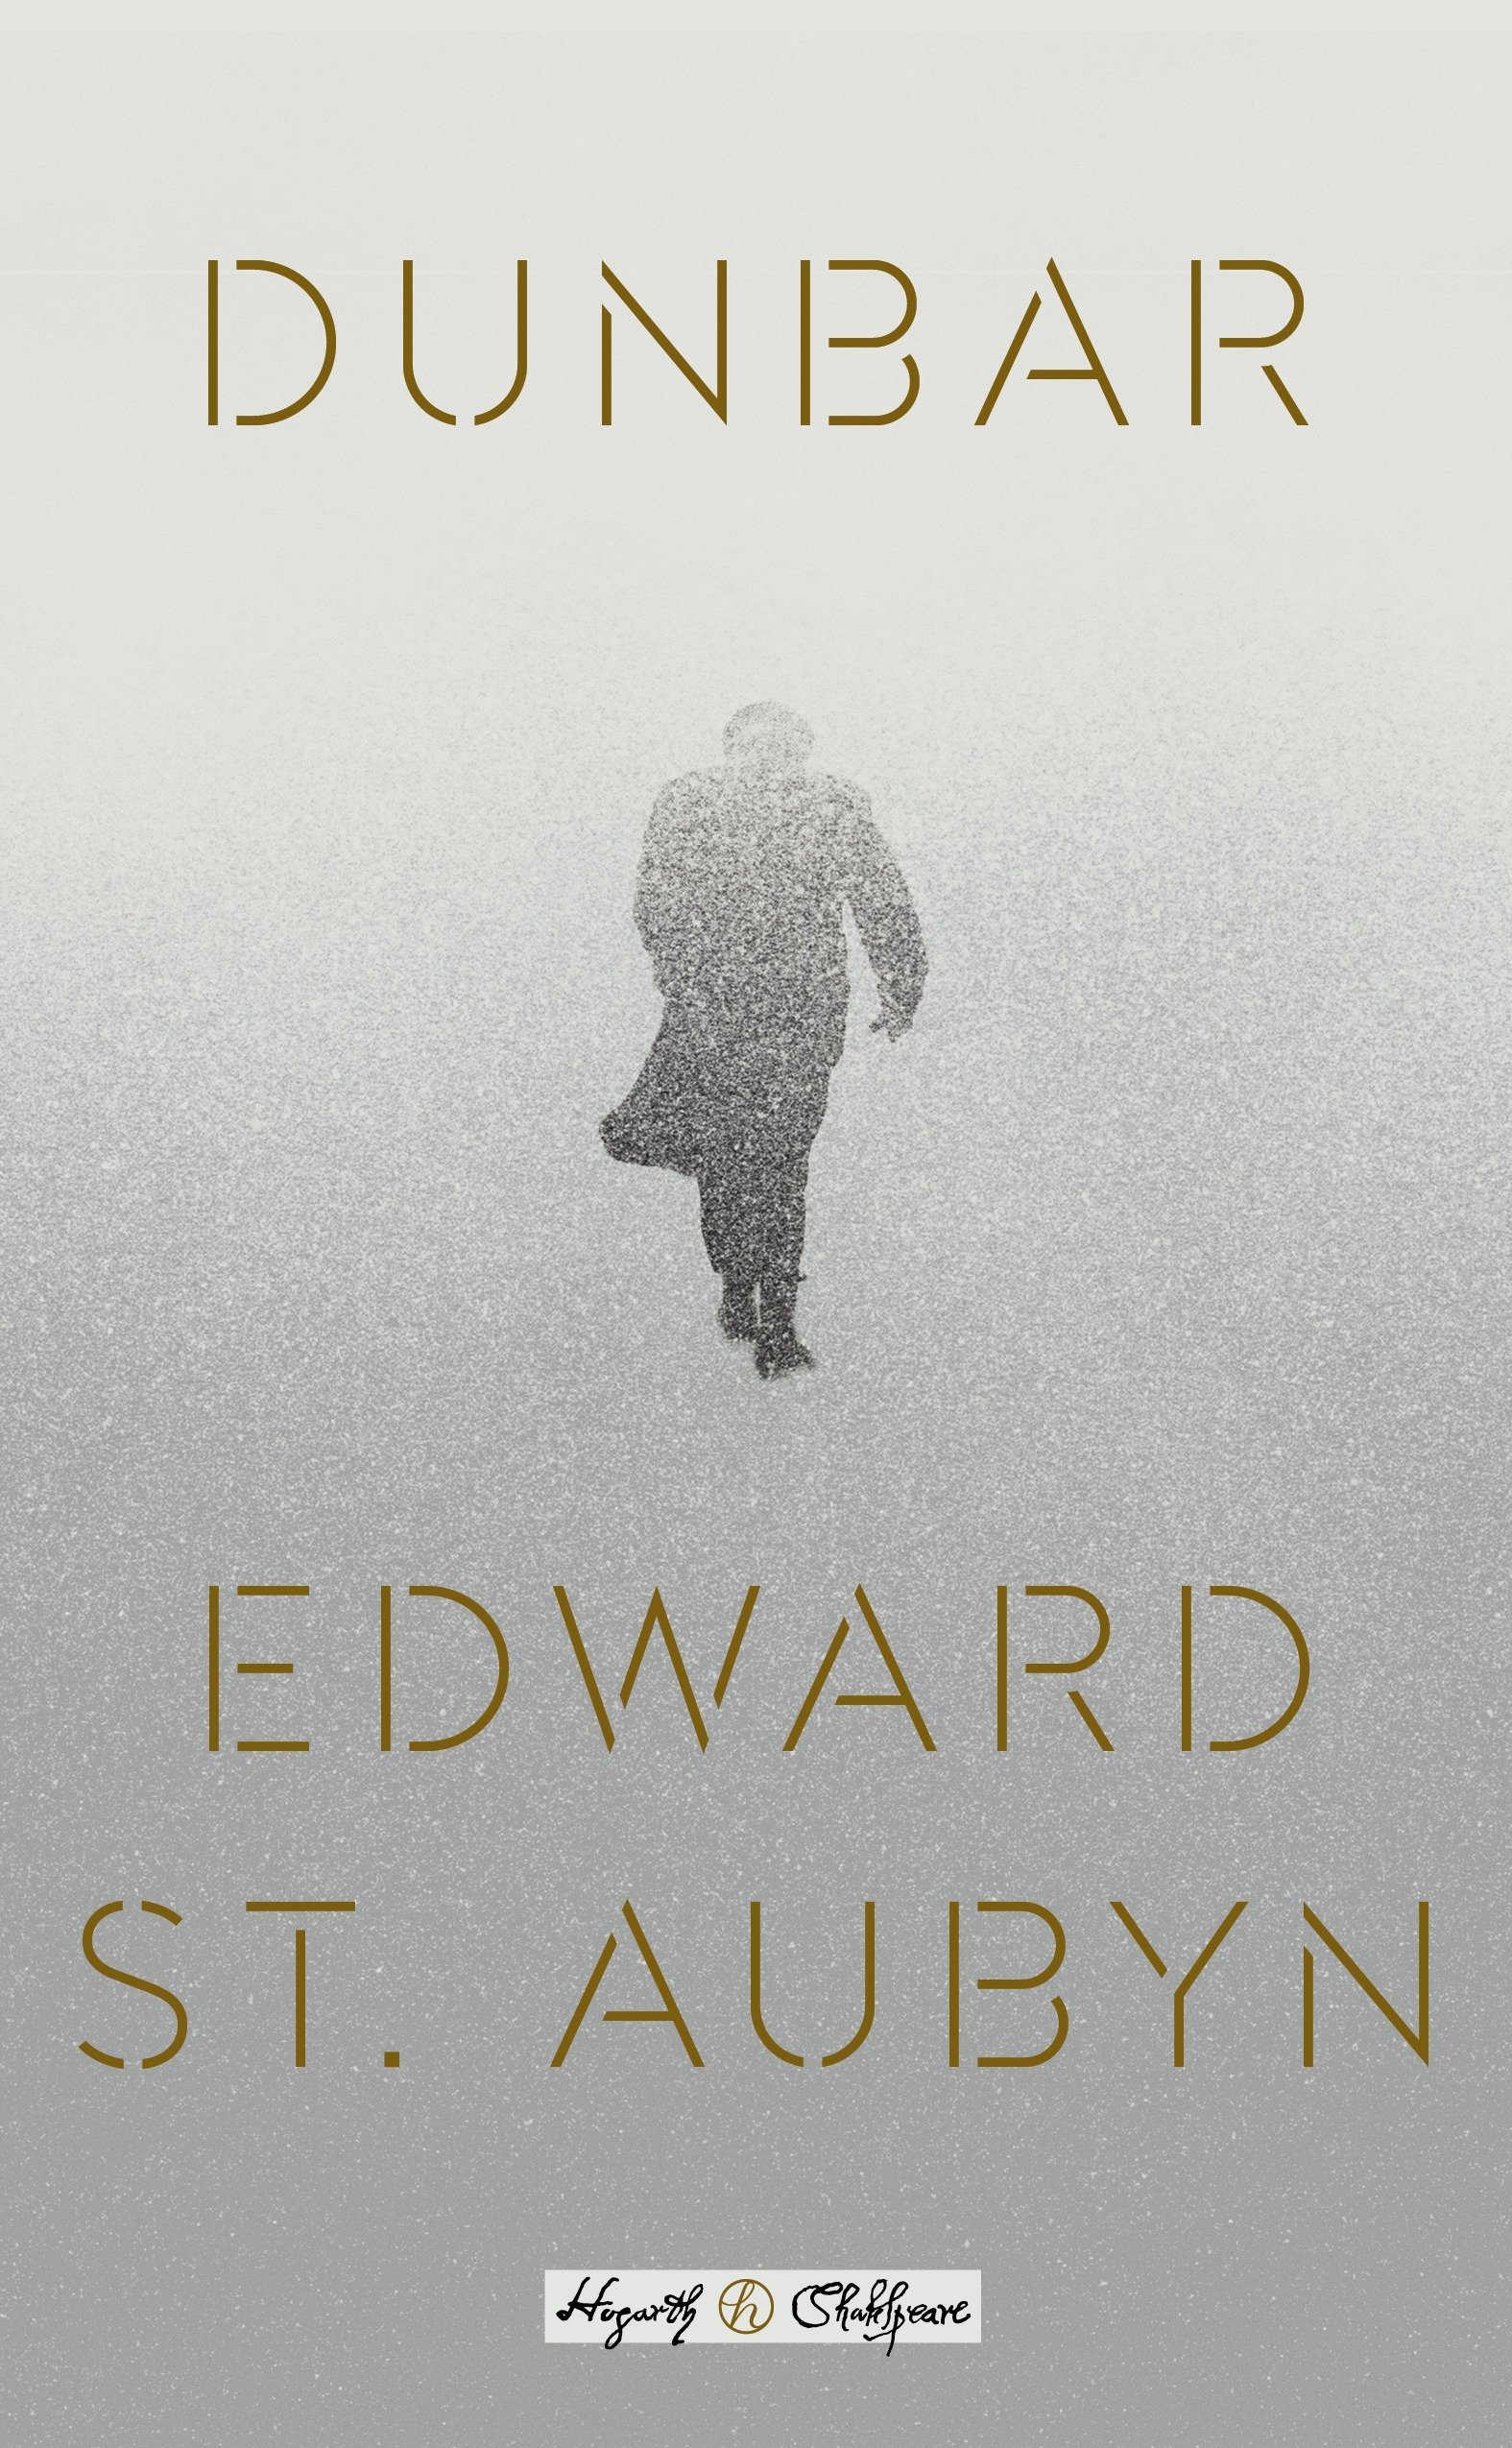 A mysterious figure walking in a snowy haze on the cover of edward st. aubyn's book "dunbar.